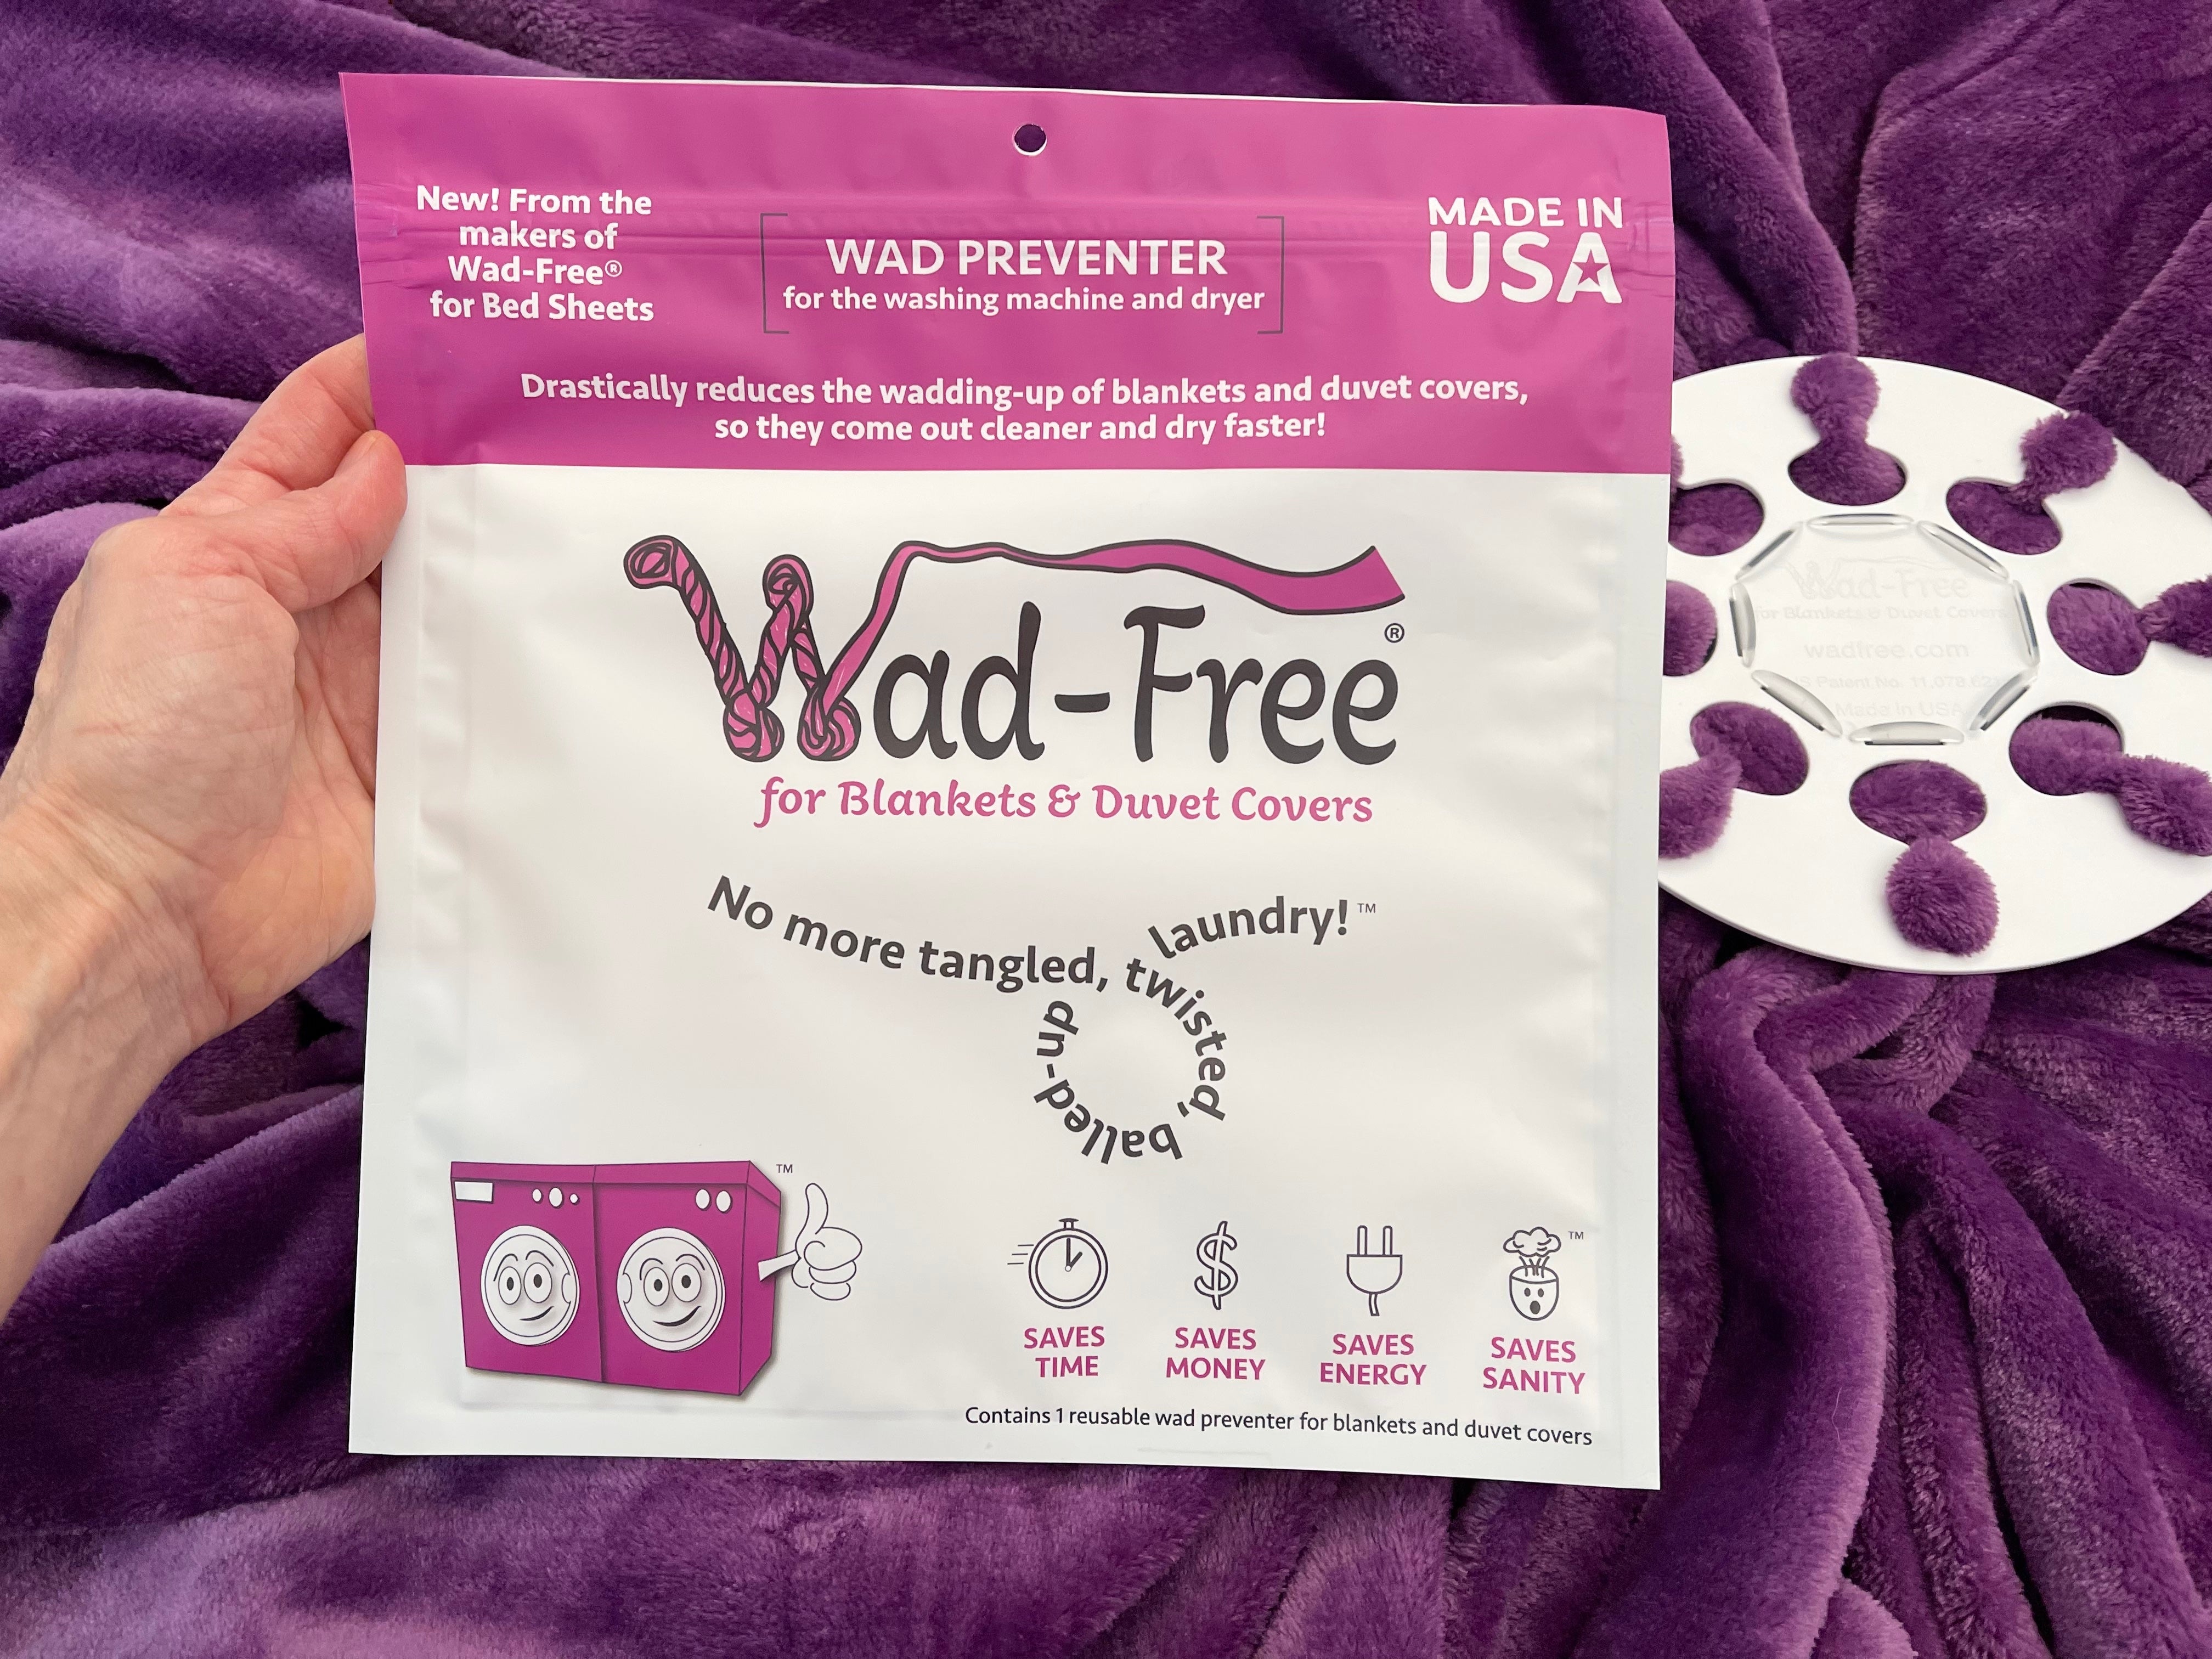 Wad-Free for Blankets and Duvet Covers Review